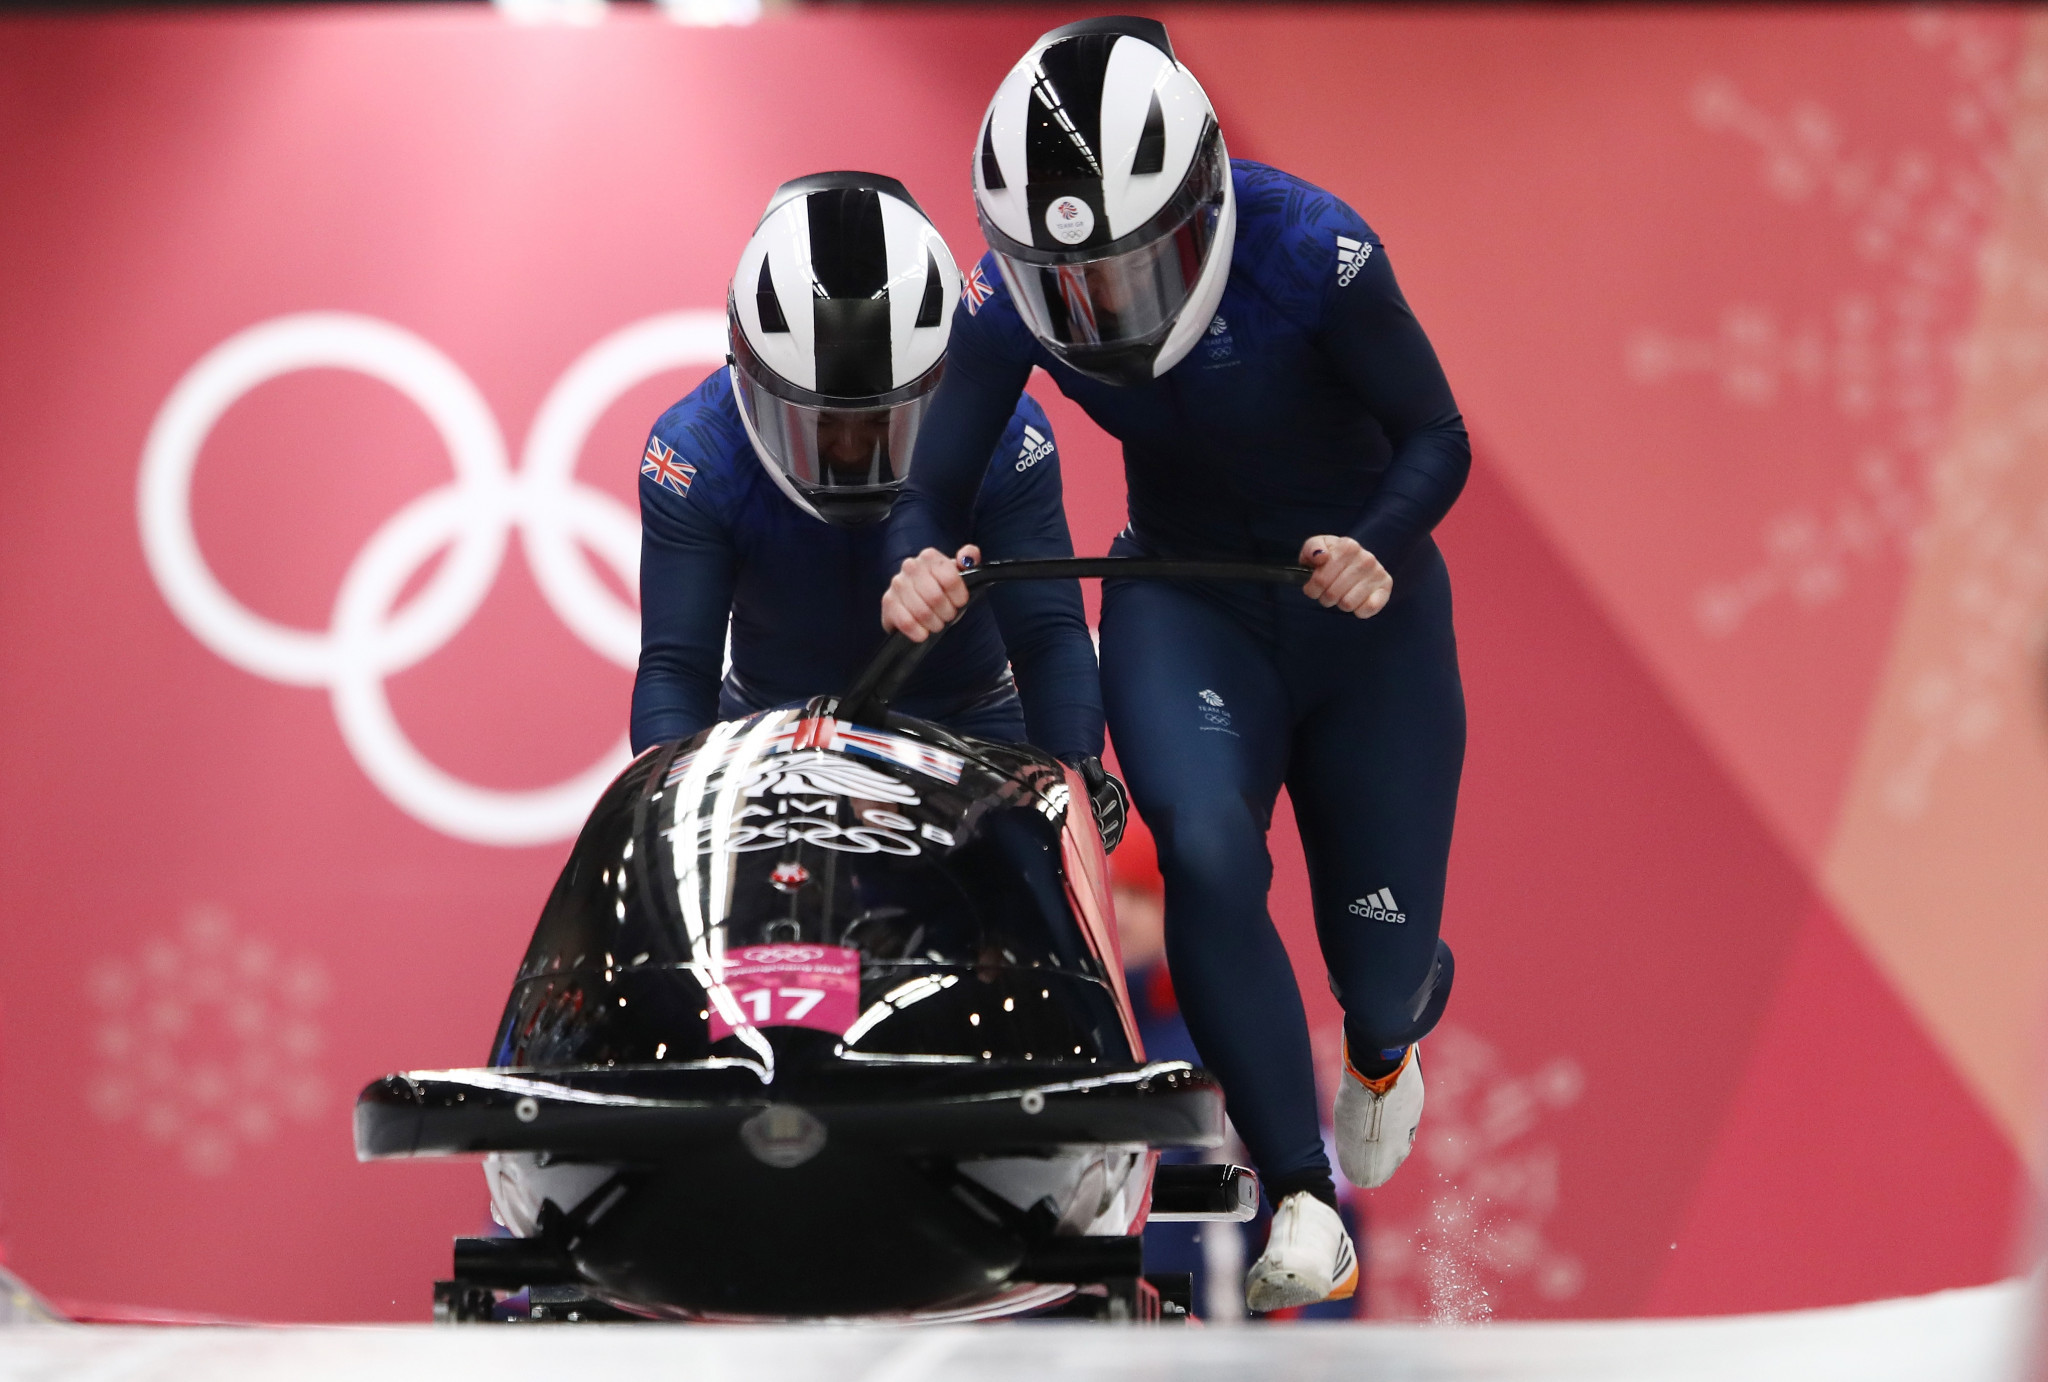 Push athlete Mica Moore will be taking a break from bobsleigh and from partnering Mica McNeill as she focuses on her studies ©Getty Images